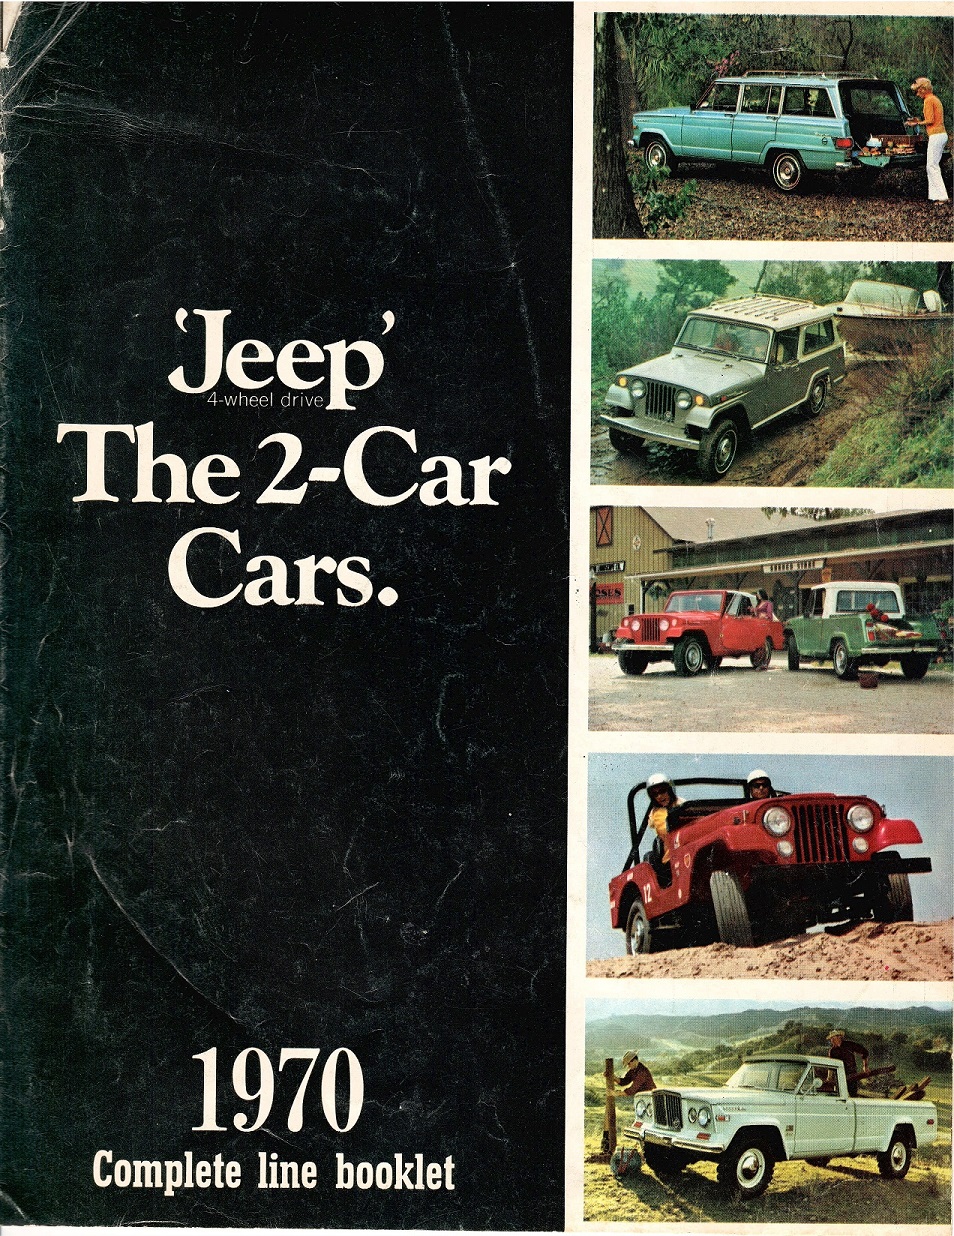 1970 Jeep Universal Sakes Brochure Front Cover resized.jpg